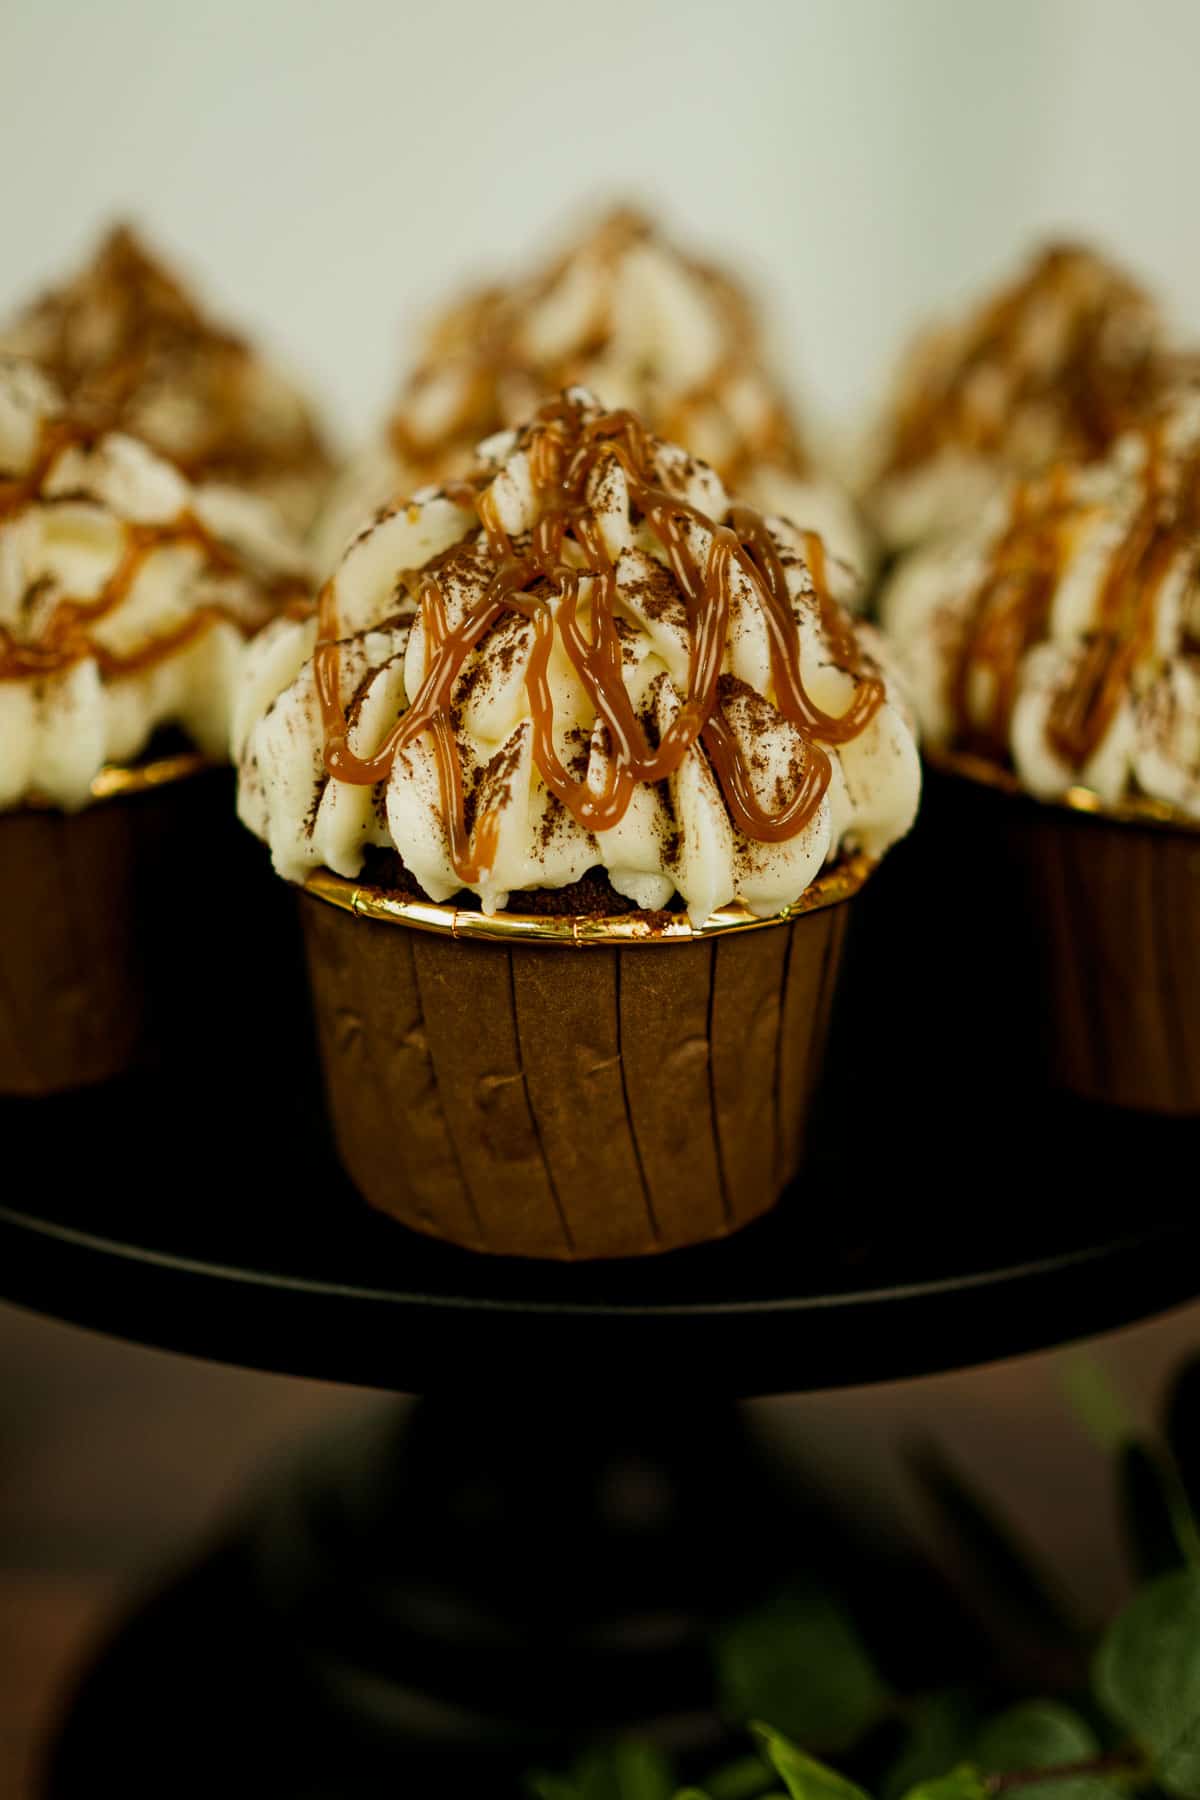 Chocolate cupcakes in chocolate casings topped with cream cheese frosting and caramel drizzle.